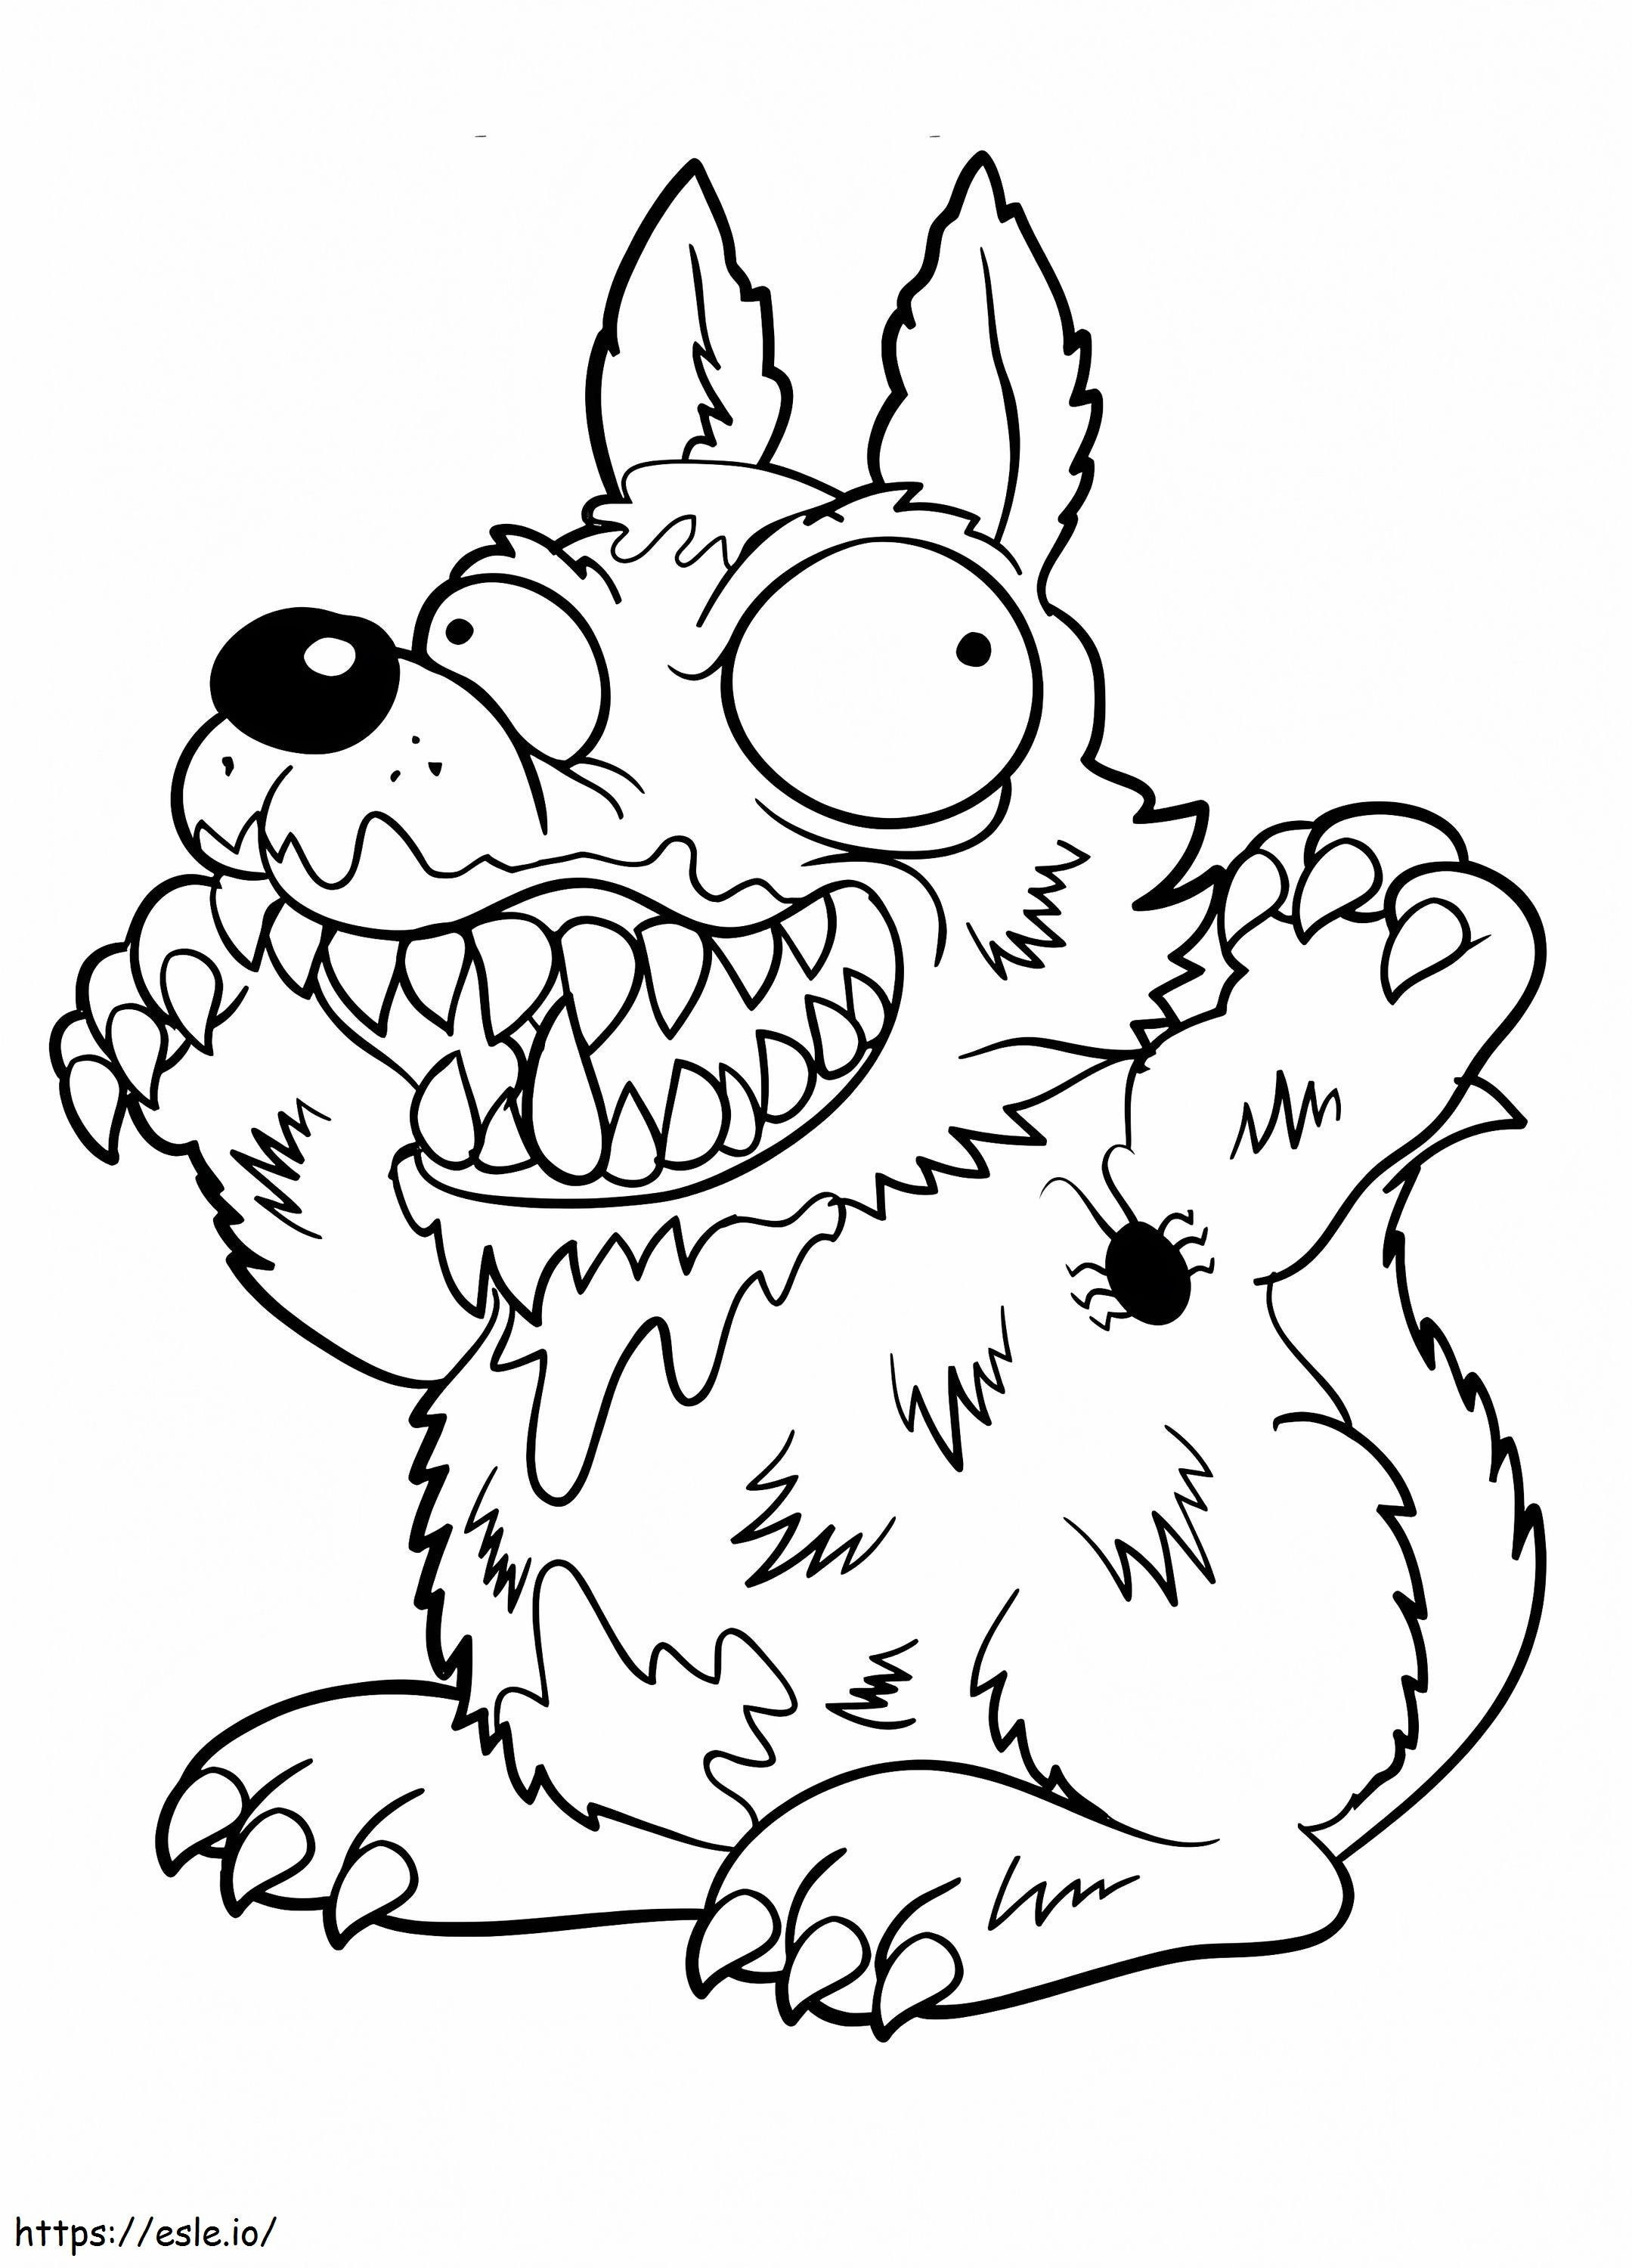 Waste Wolf Trash Pack coloring page